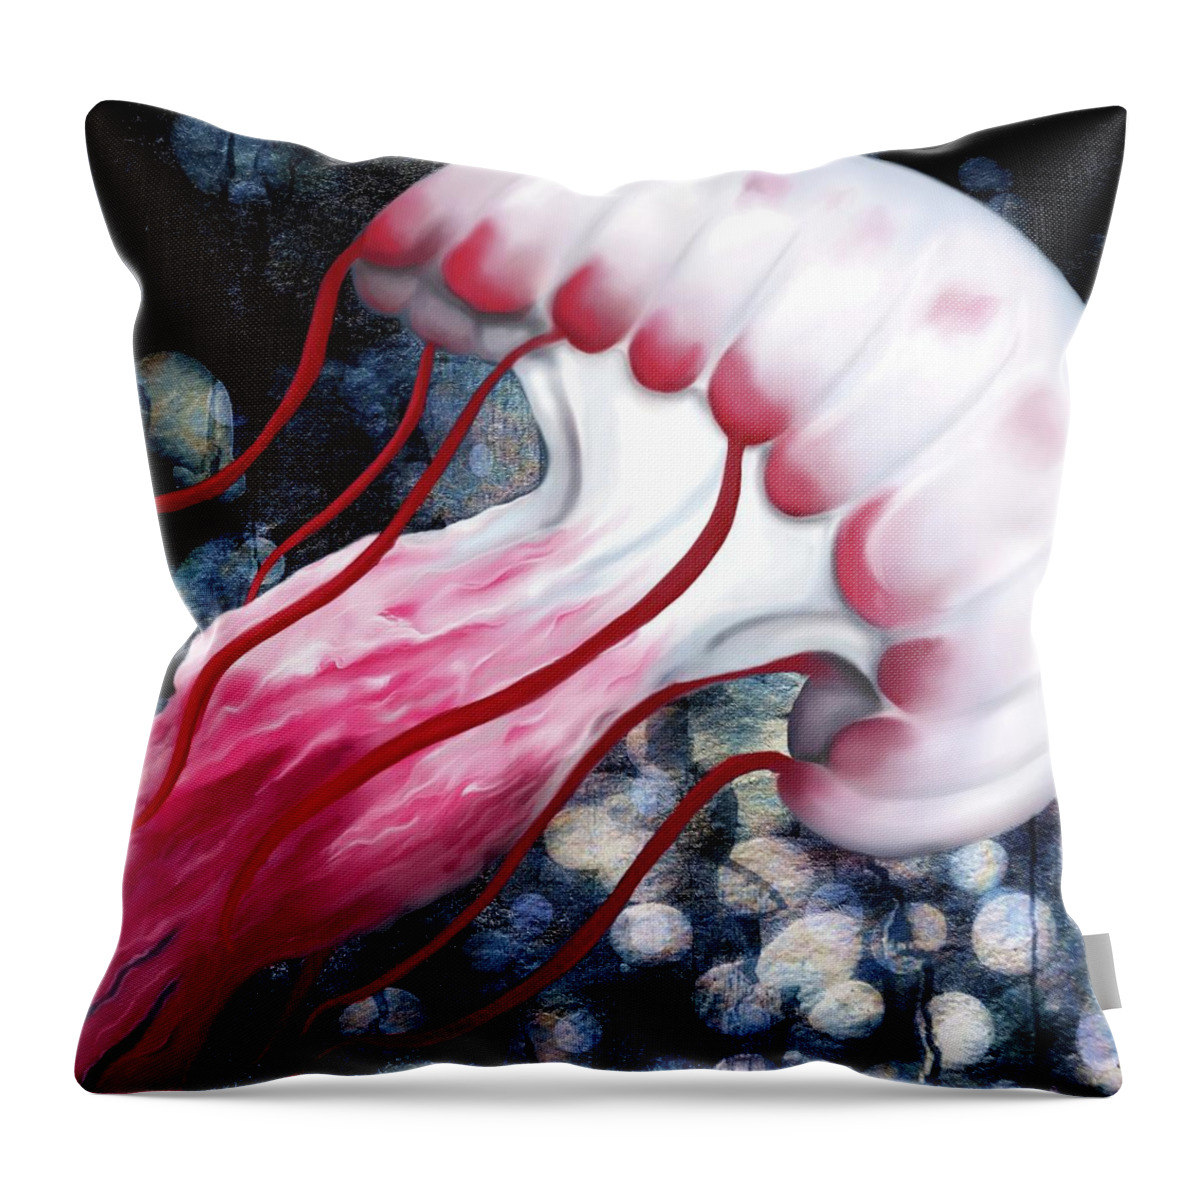 Jellyfish Throw Pillow featuring the digital art Red and White Jellyfish by Sand And Chi